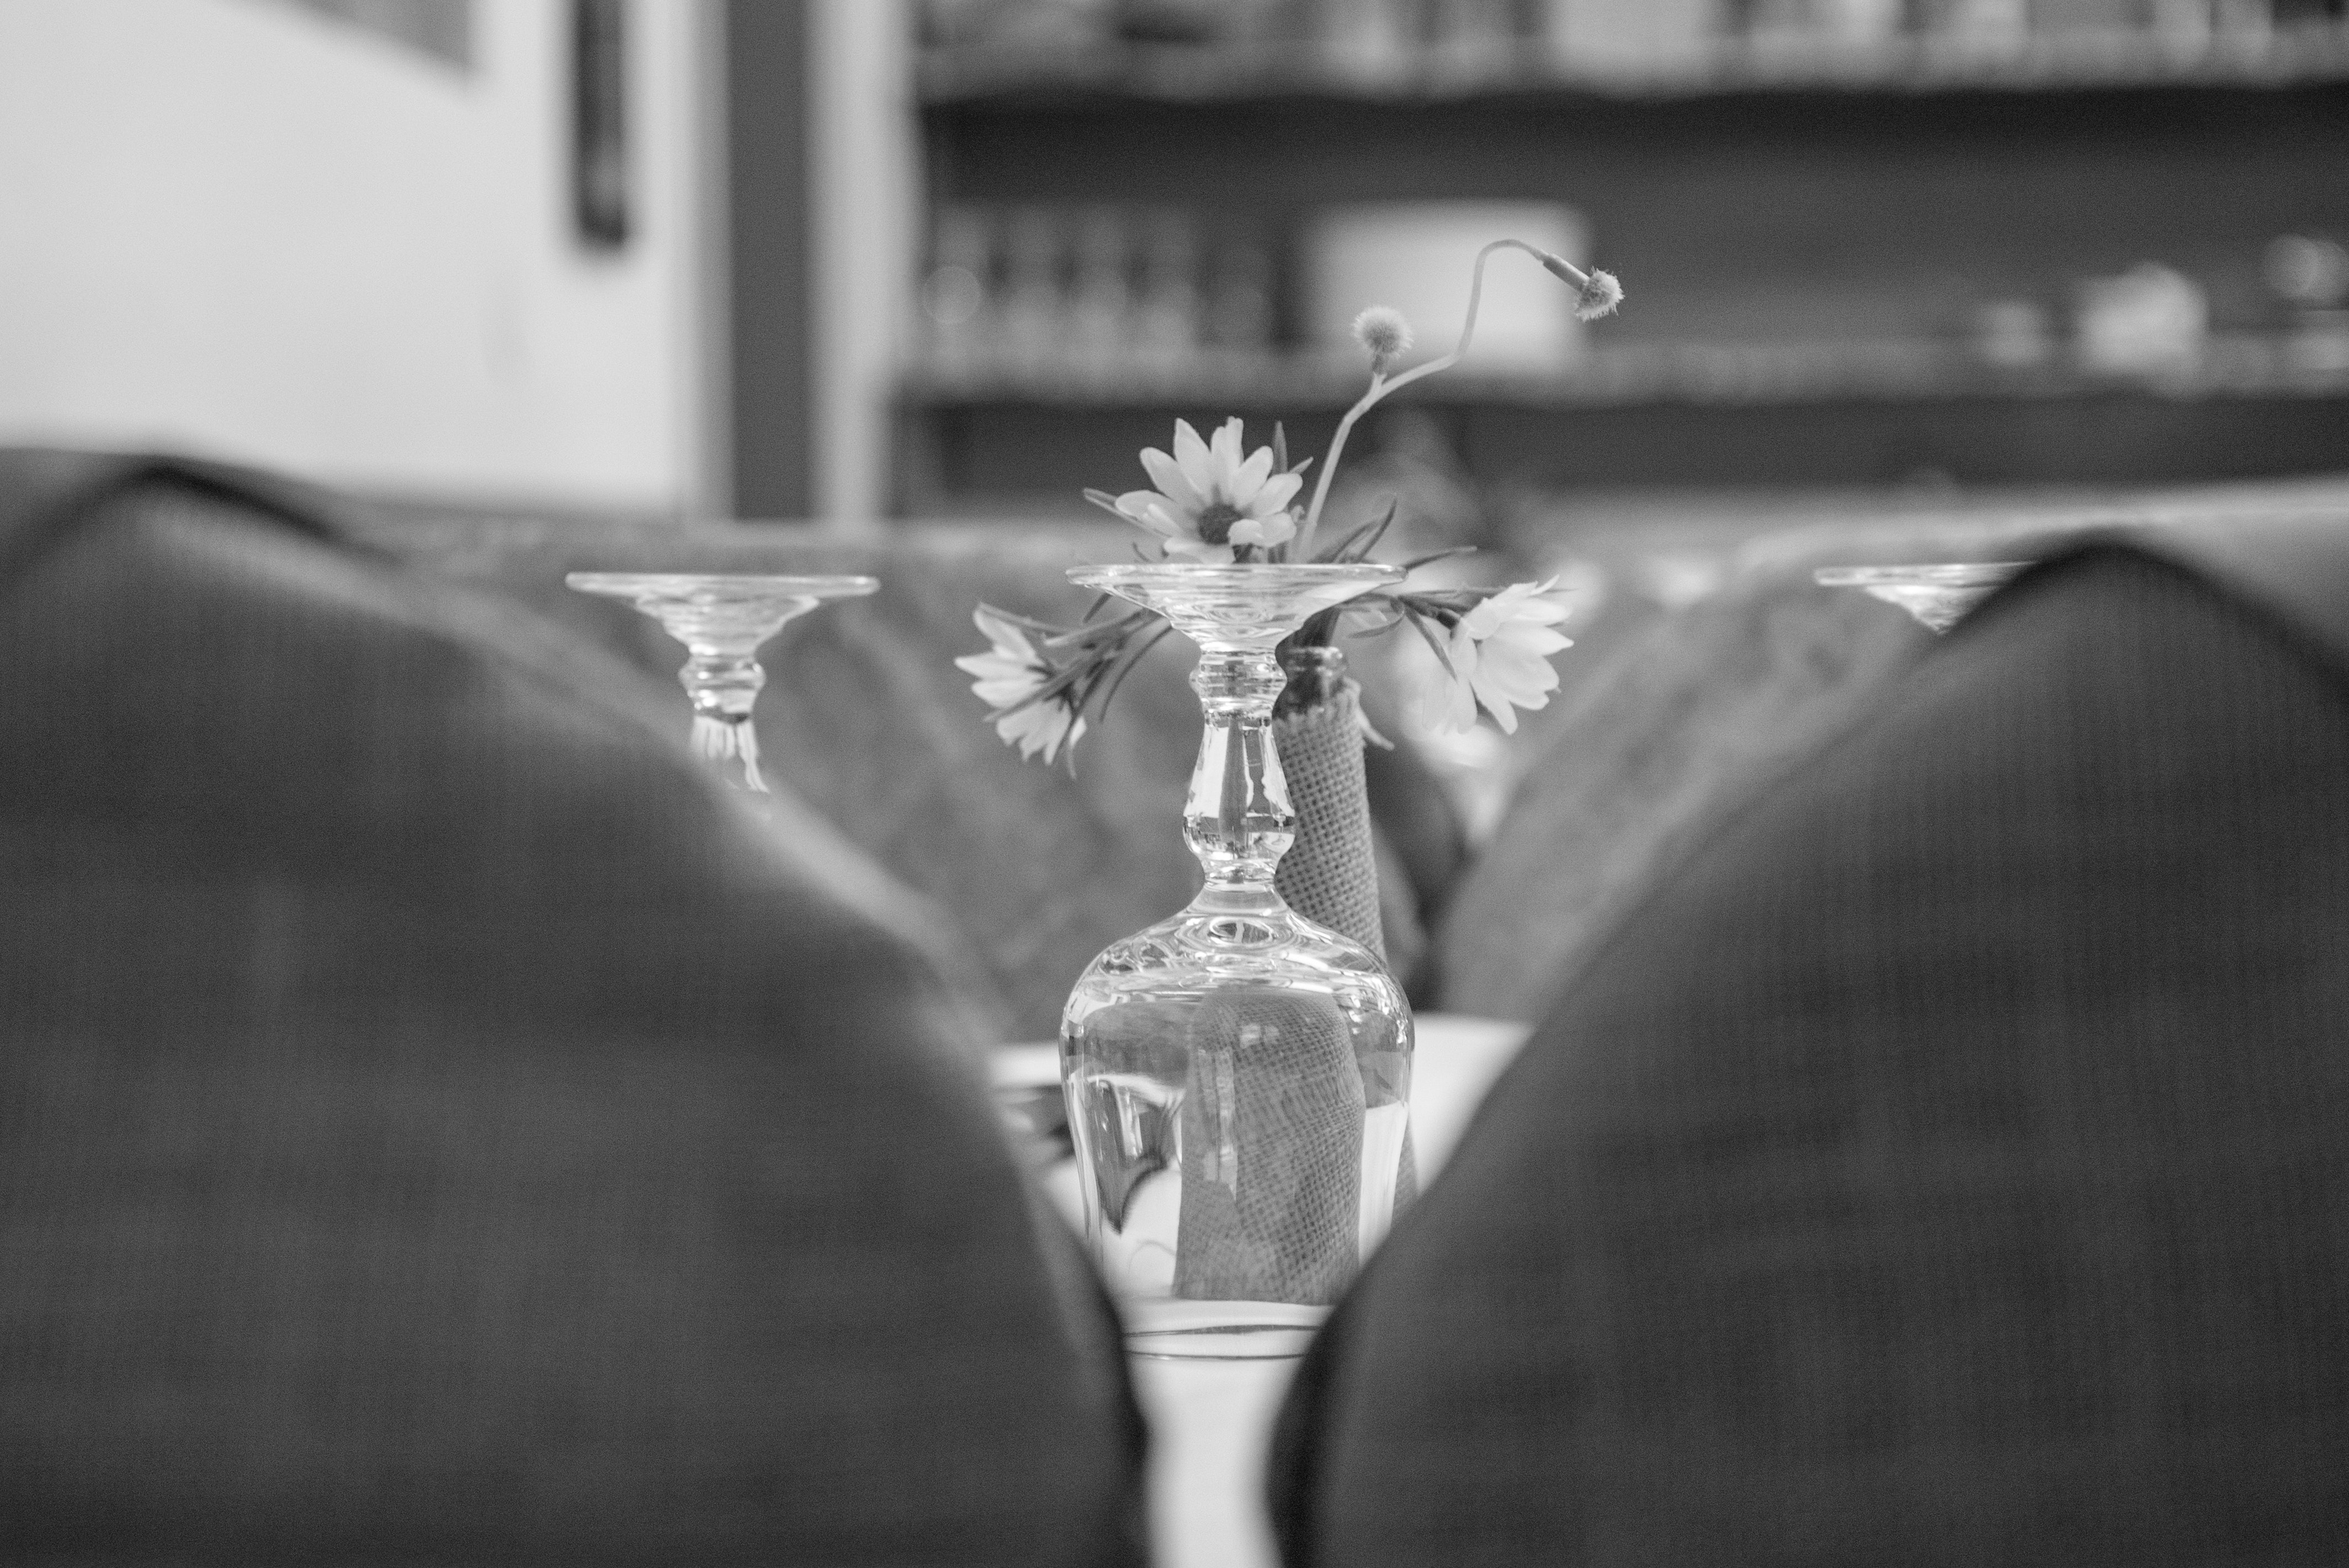 Upside down wine glass behind the flower grayscale photo